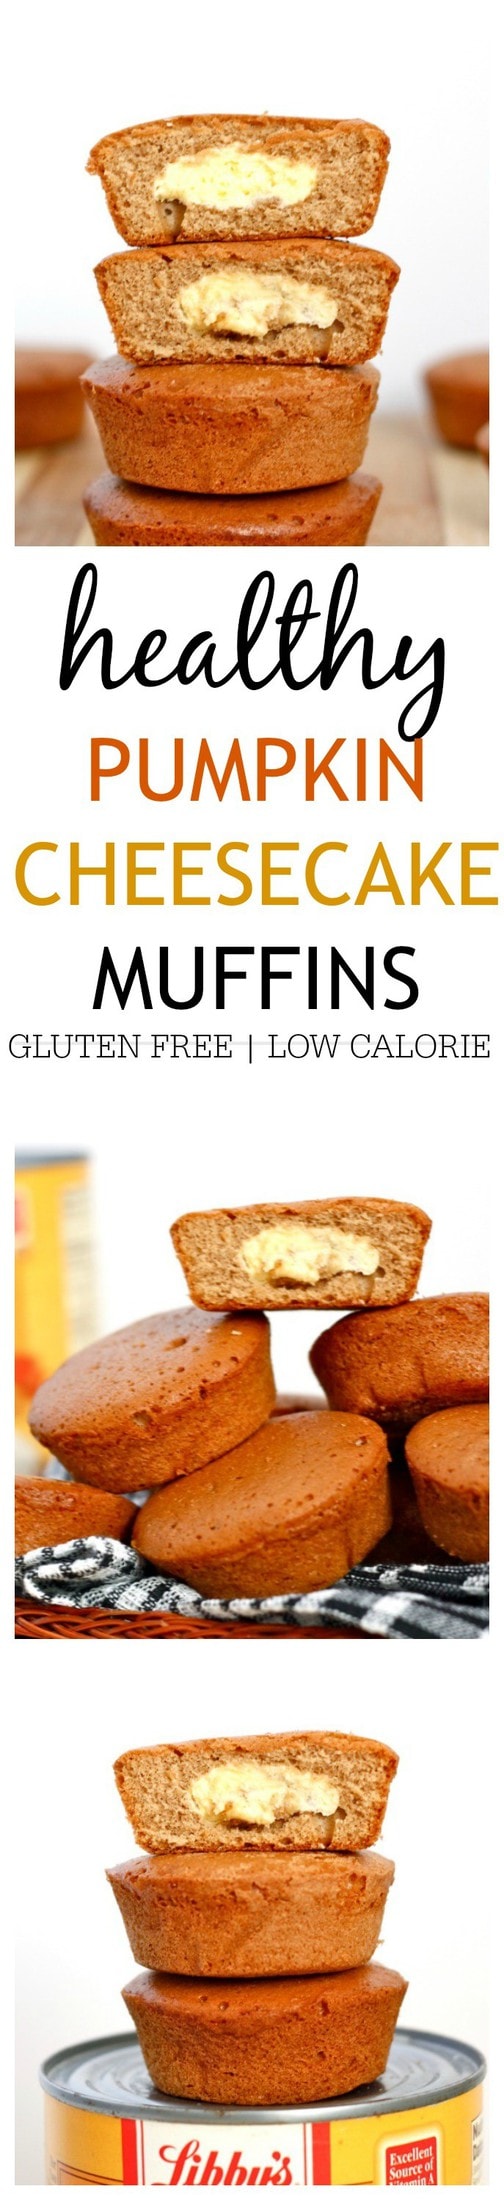 Healthy Pumpkin Cheesecake Muffins- Delicious, impressive yet super simple to whip up- These Healthy Pumpkin Cheesecake Muffins are NOT just reserved for Fall! Gluten free, high in protein and very low in sugar, these are the perfect snack between meals or dessert! @thebigmansworld - thebigmansworld.com